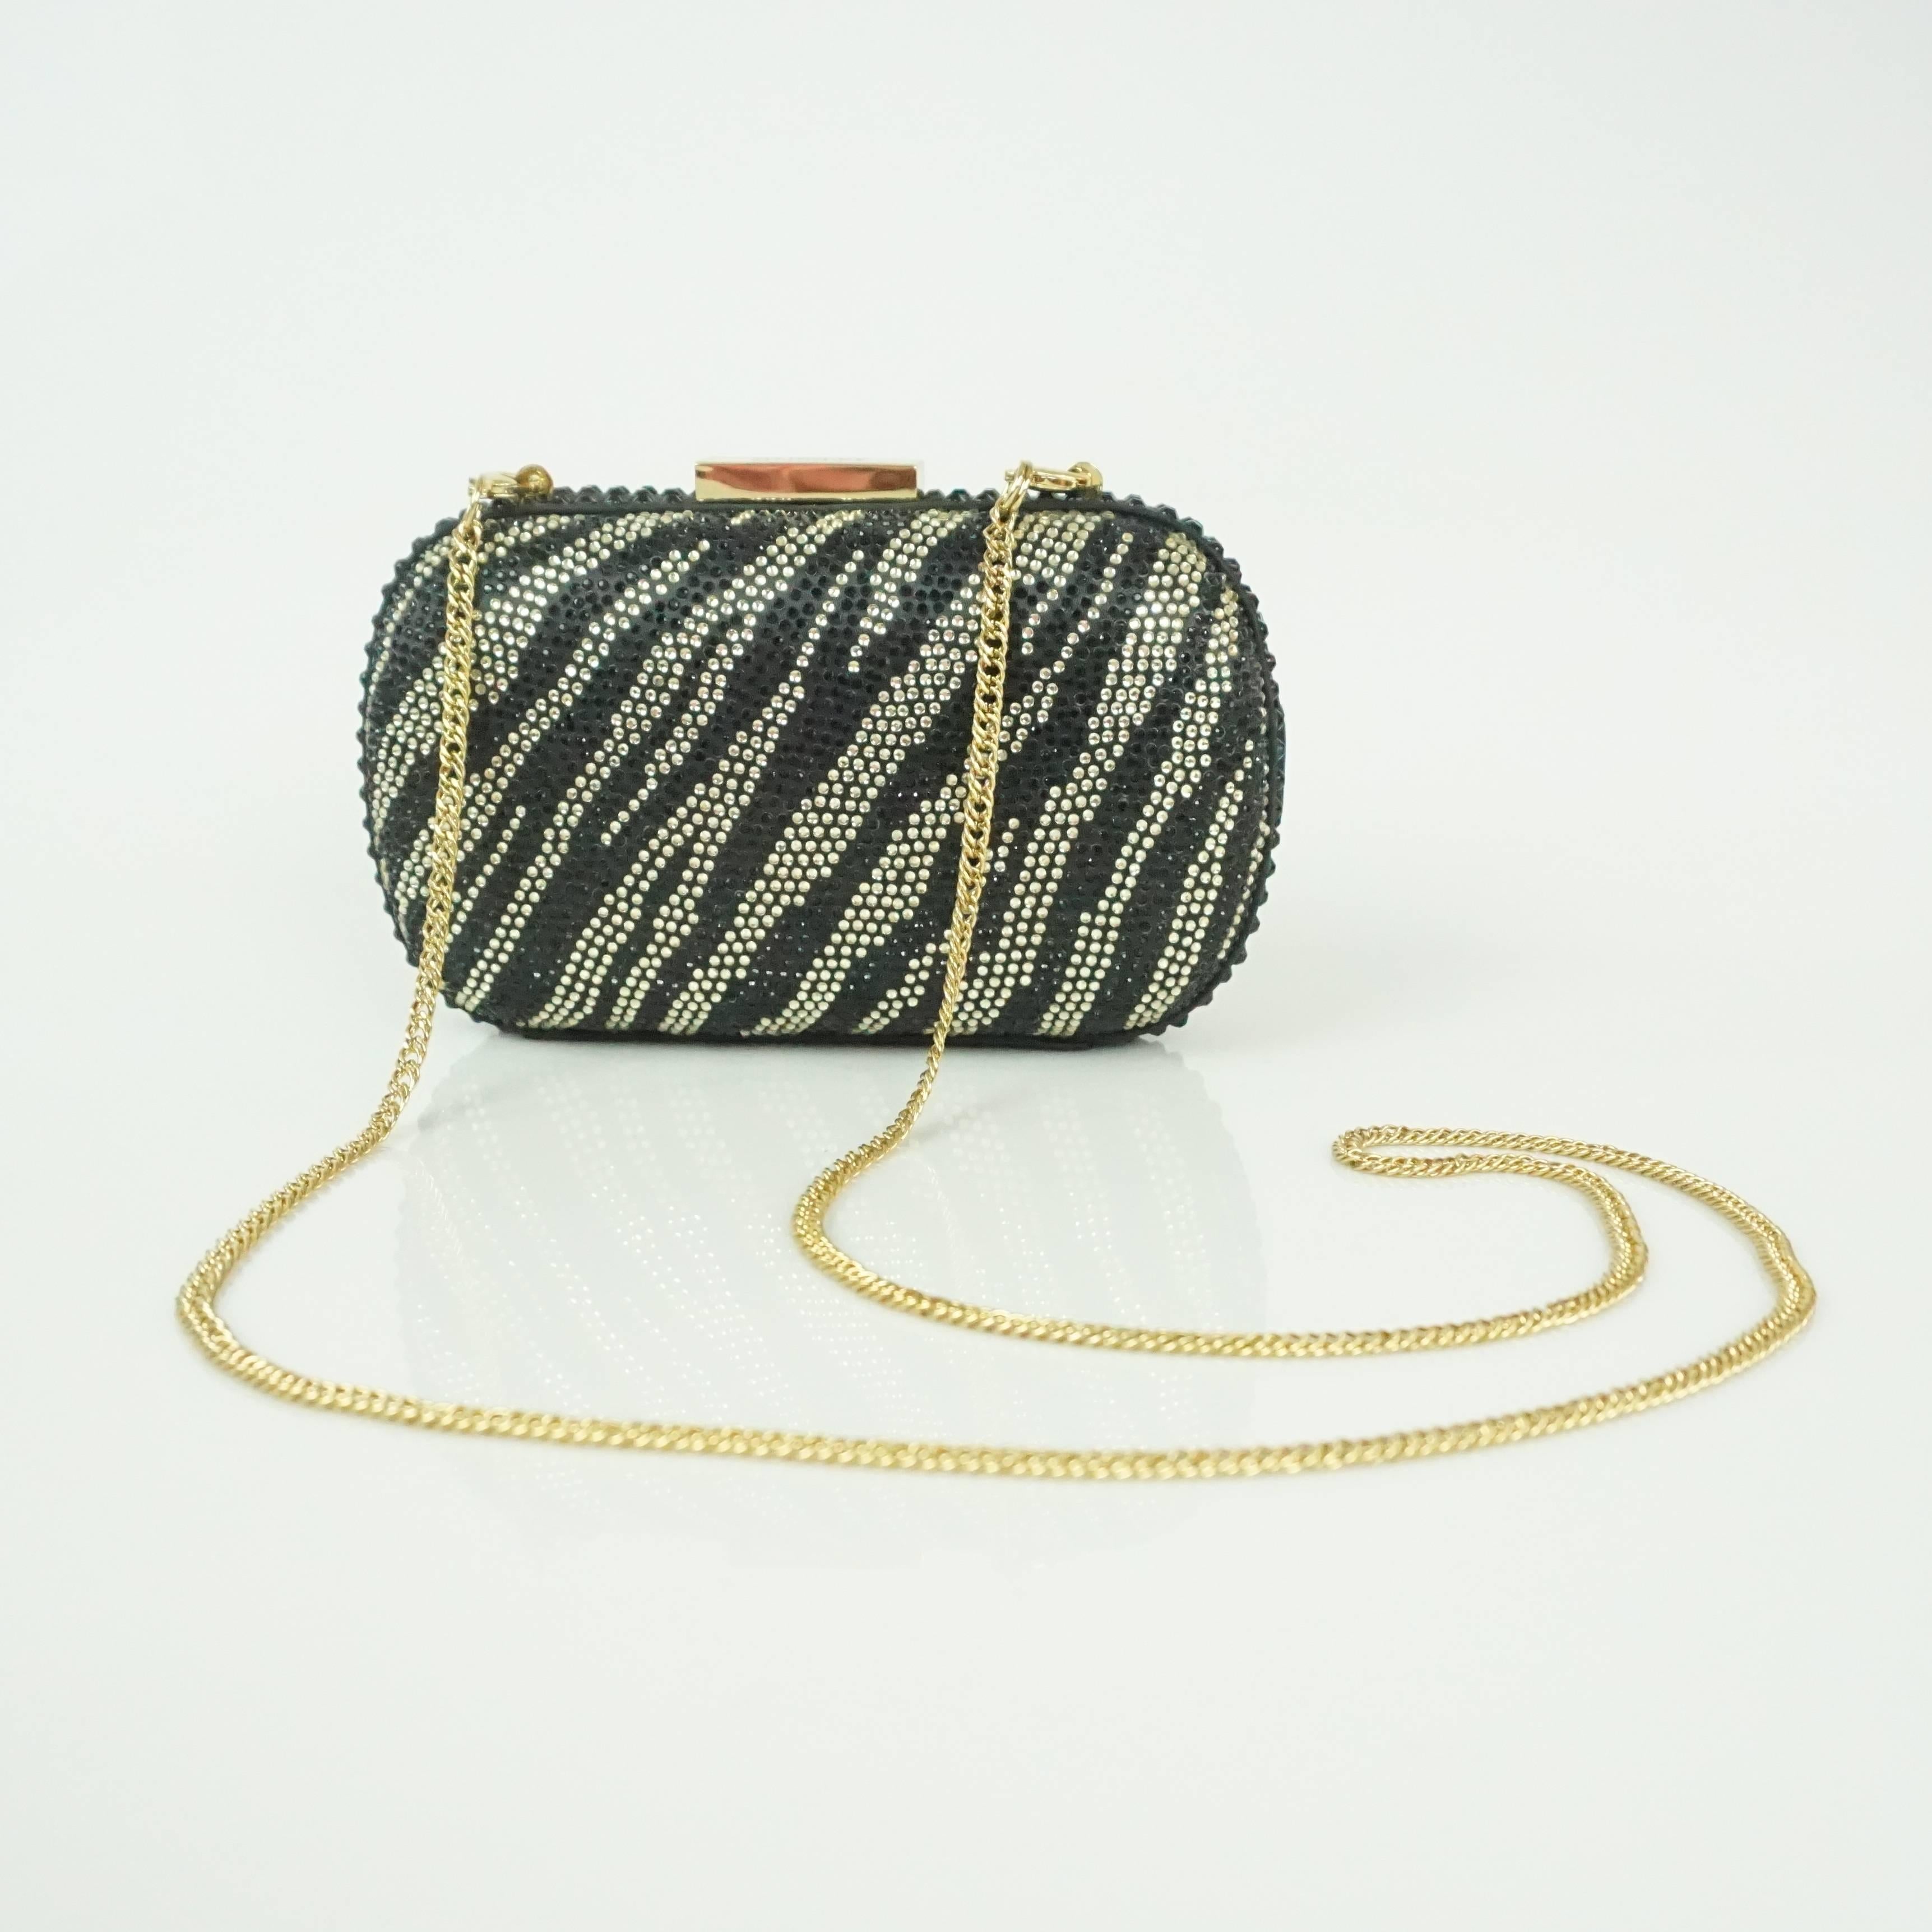 This Badgley Mischka clutch is covered in black and light gold rhinestones. These rhinestones form a somewhat zebra print and there is a removable gold chain. Inside, there is a small pocket. This clutch is in excellent